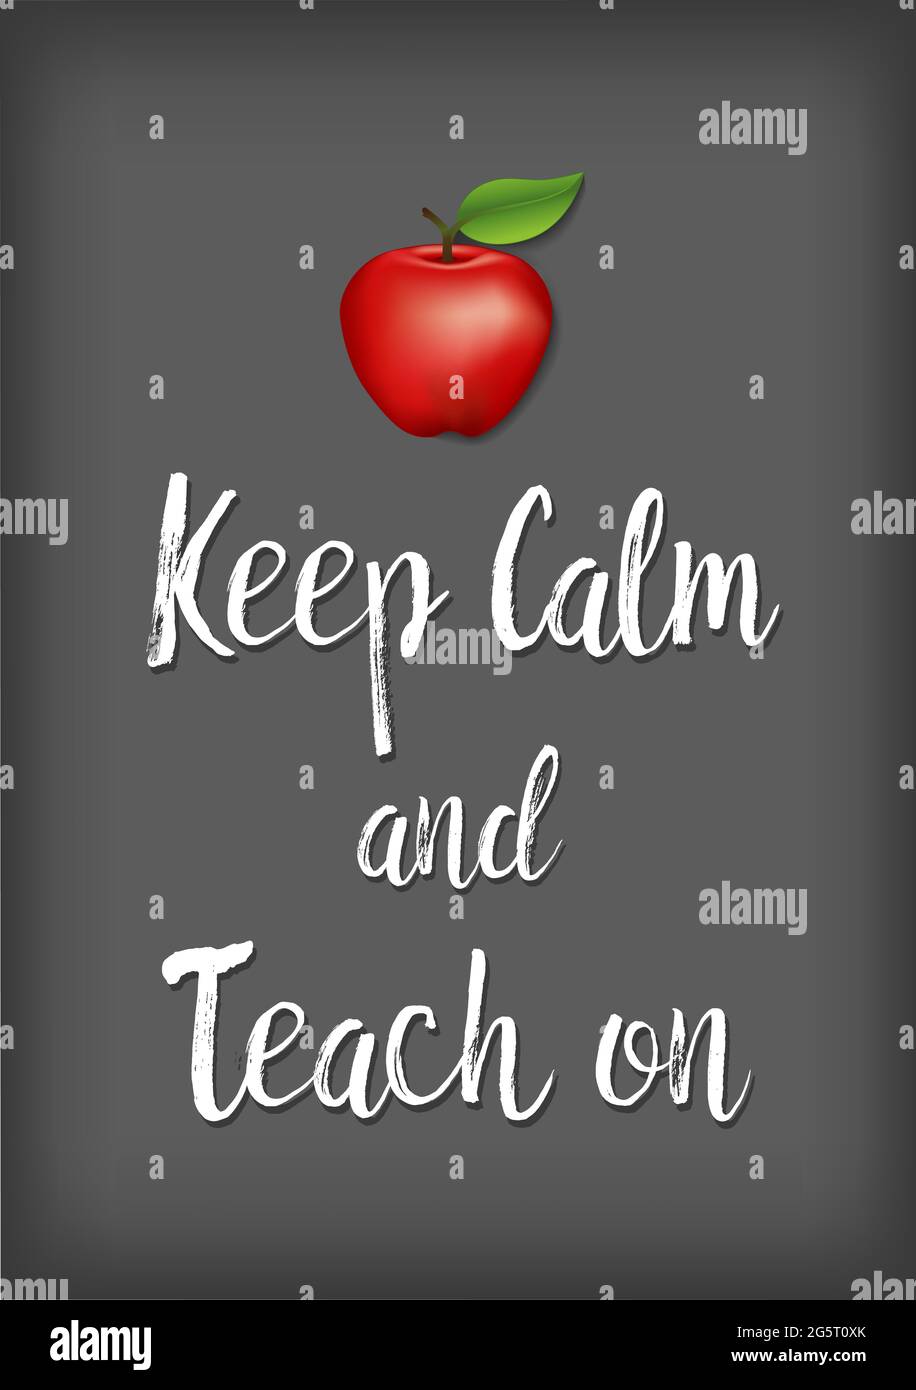 Keep Calm and Teach On with an apple for the teacher motivational and inspirational poster, chalkboard background Stock Photo